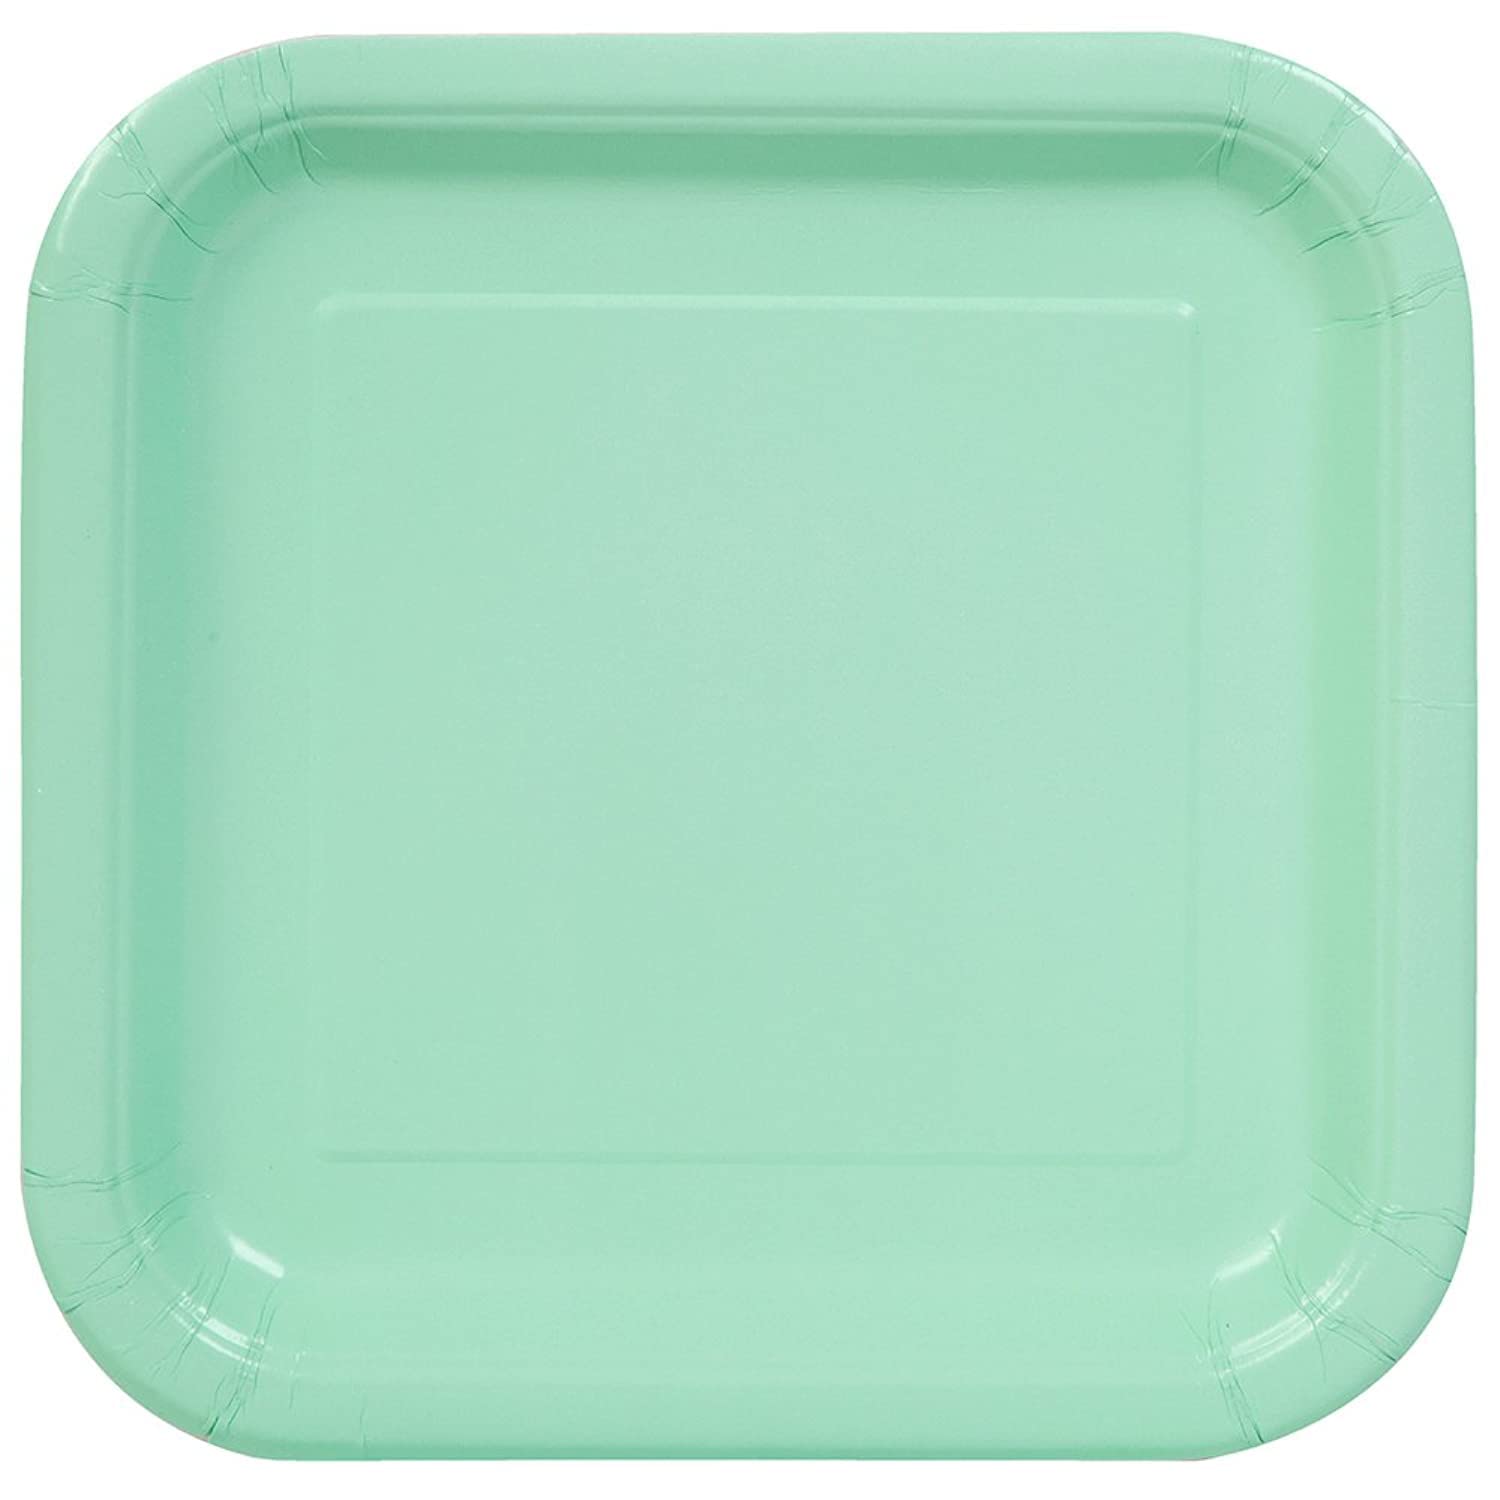 Mint Green Solid Plastic Square Dessert Plates (Pack of 16) 7